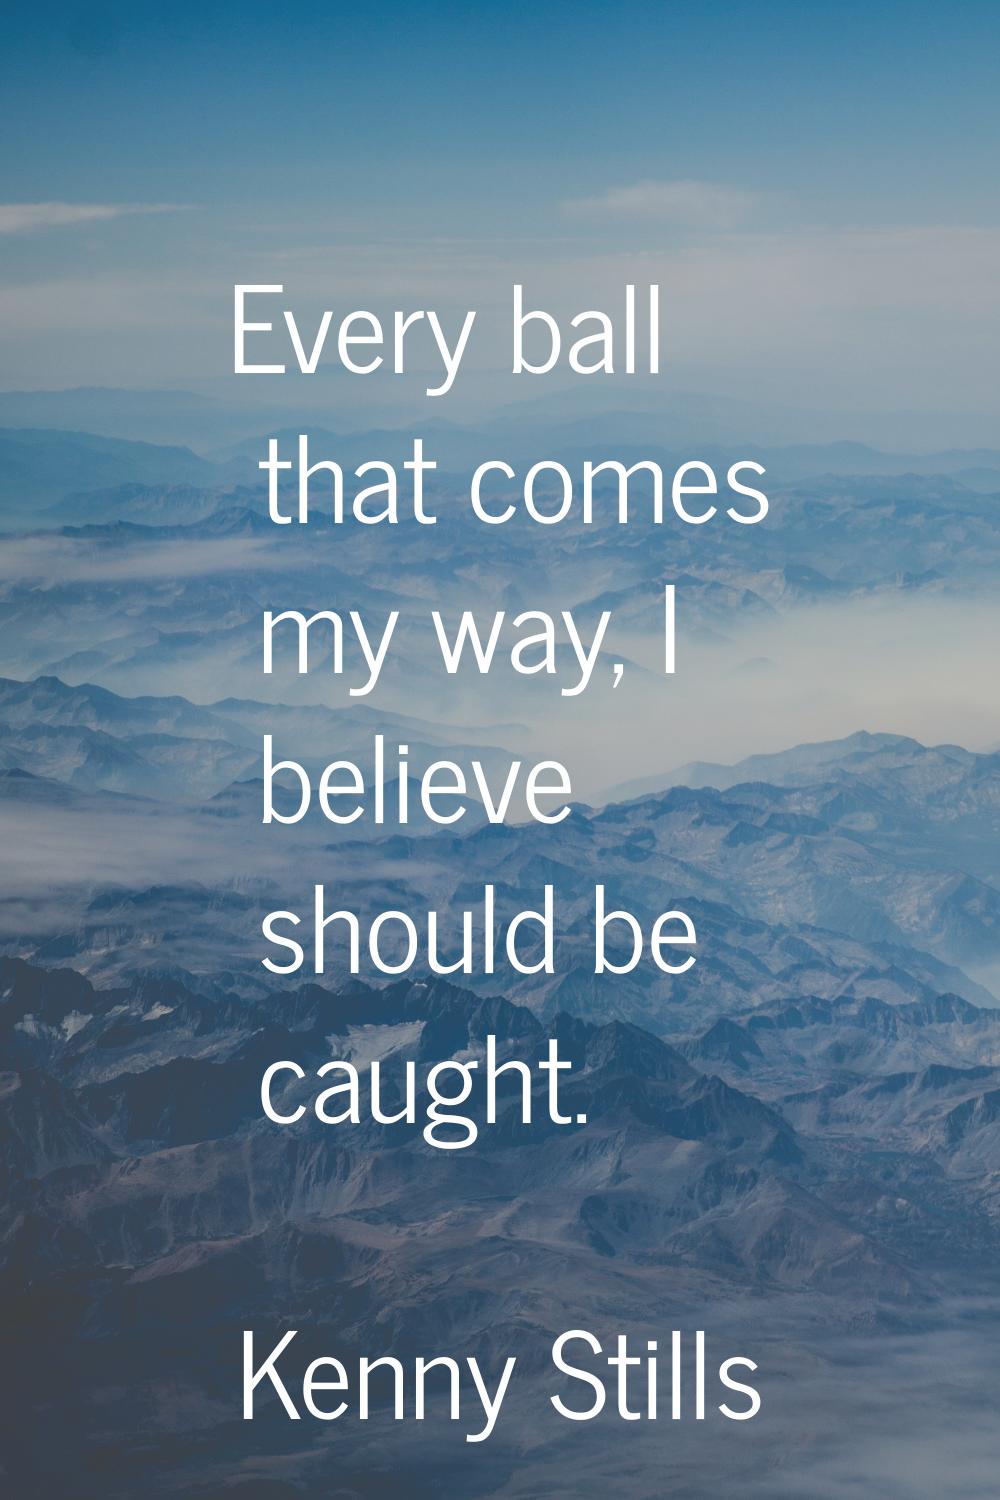 Every ball that comes my way, I believe should be caught.